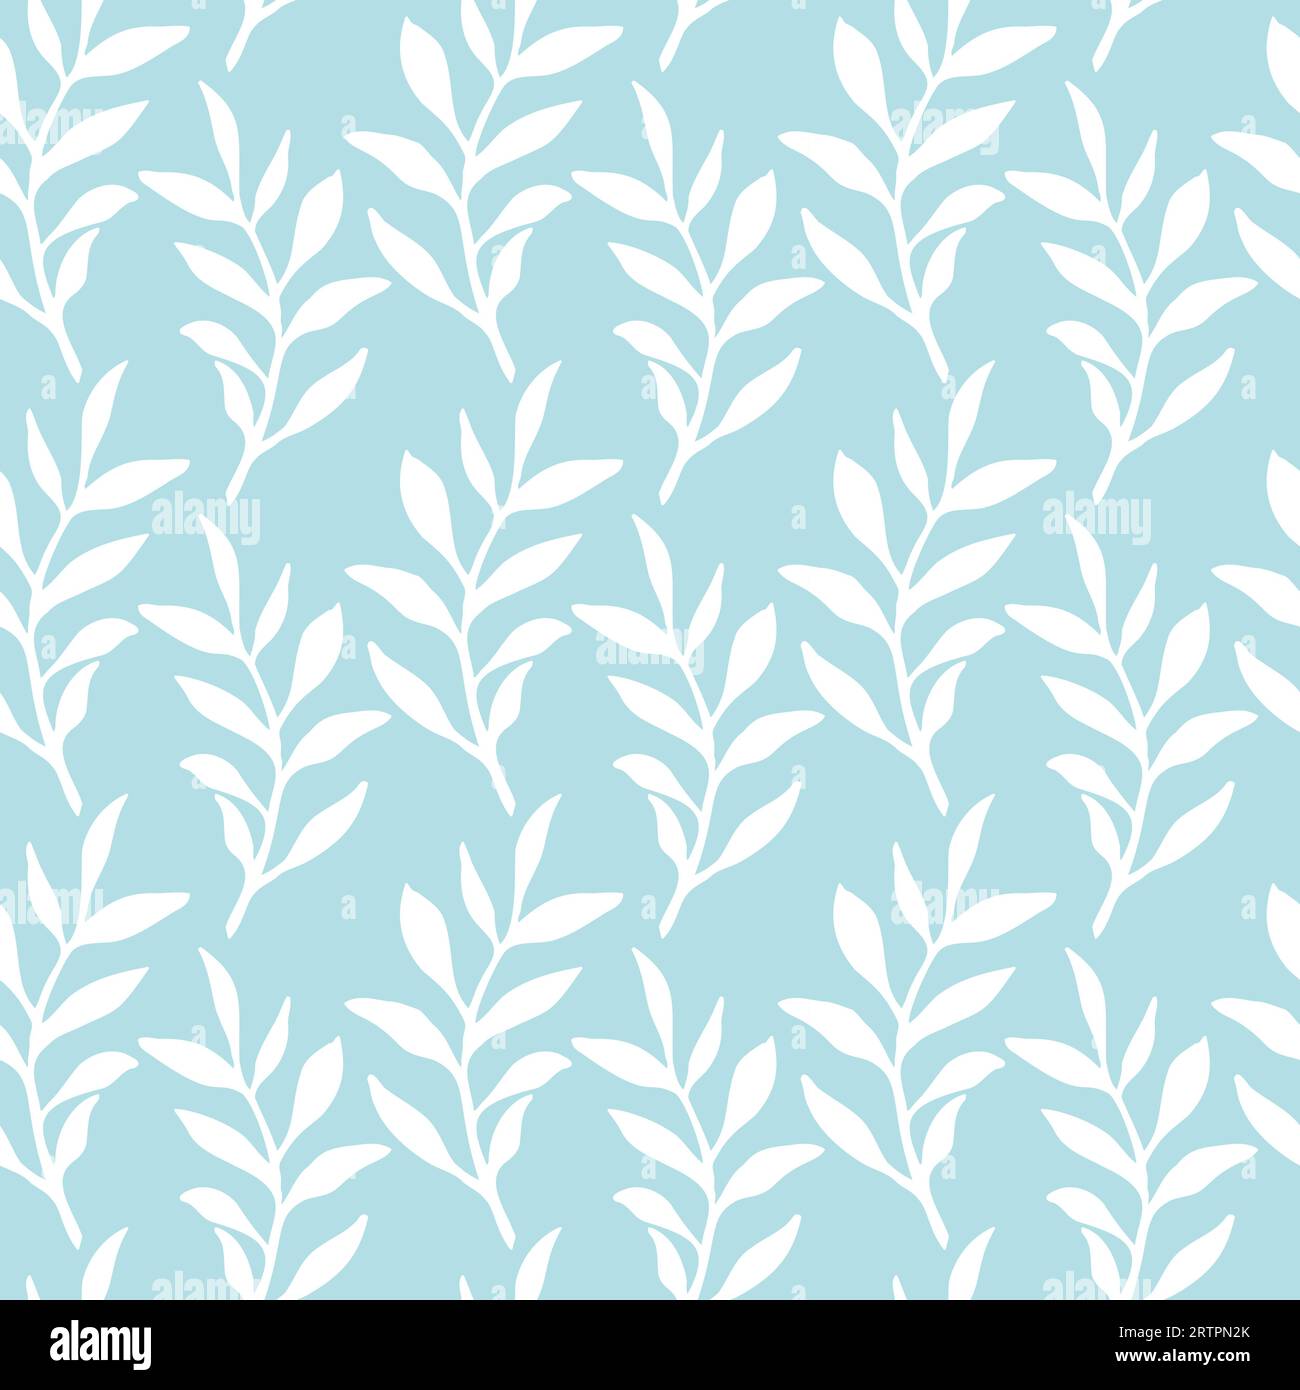 Blue leaves seamless pattern for surface design, textile, wallpaper. Silhouette floral elements, vector background Stock Vector